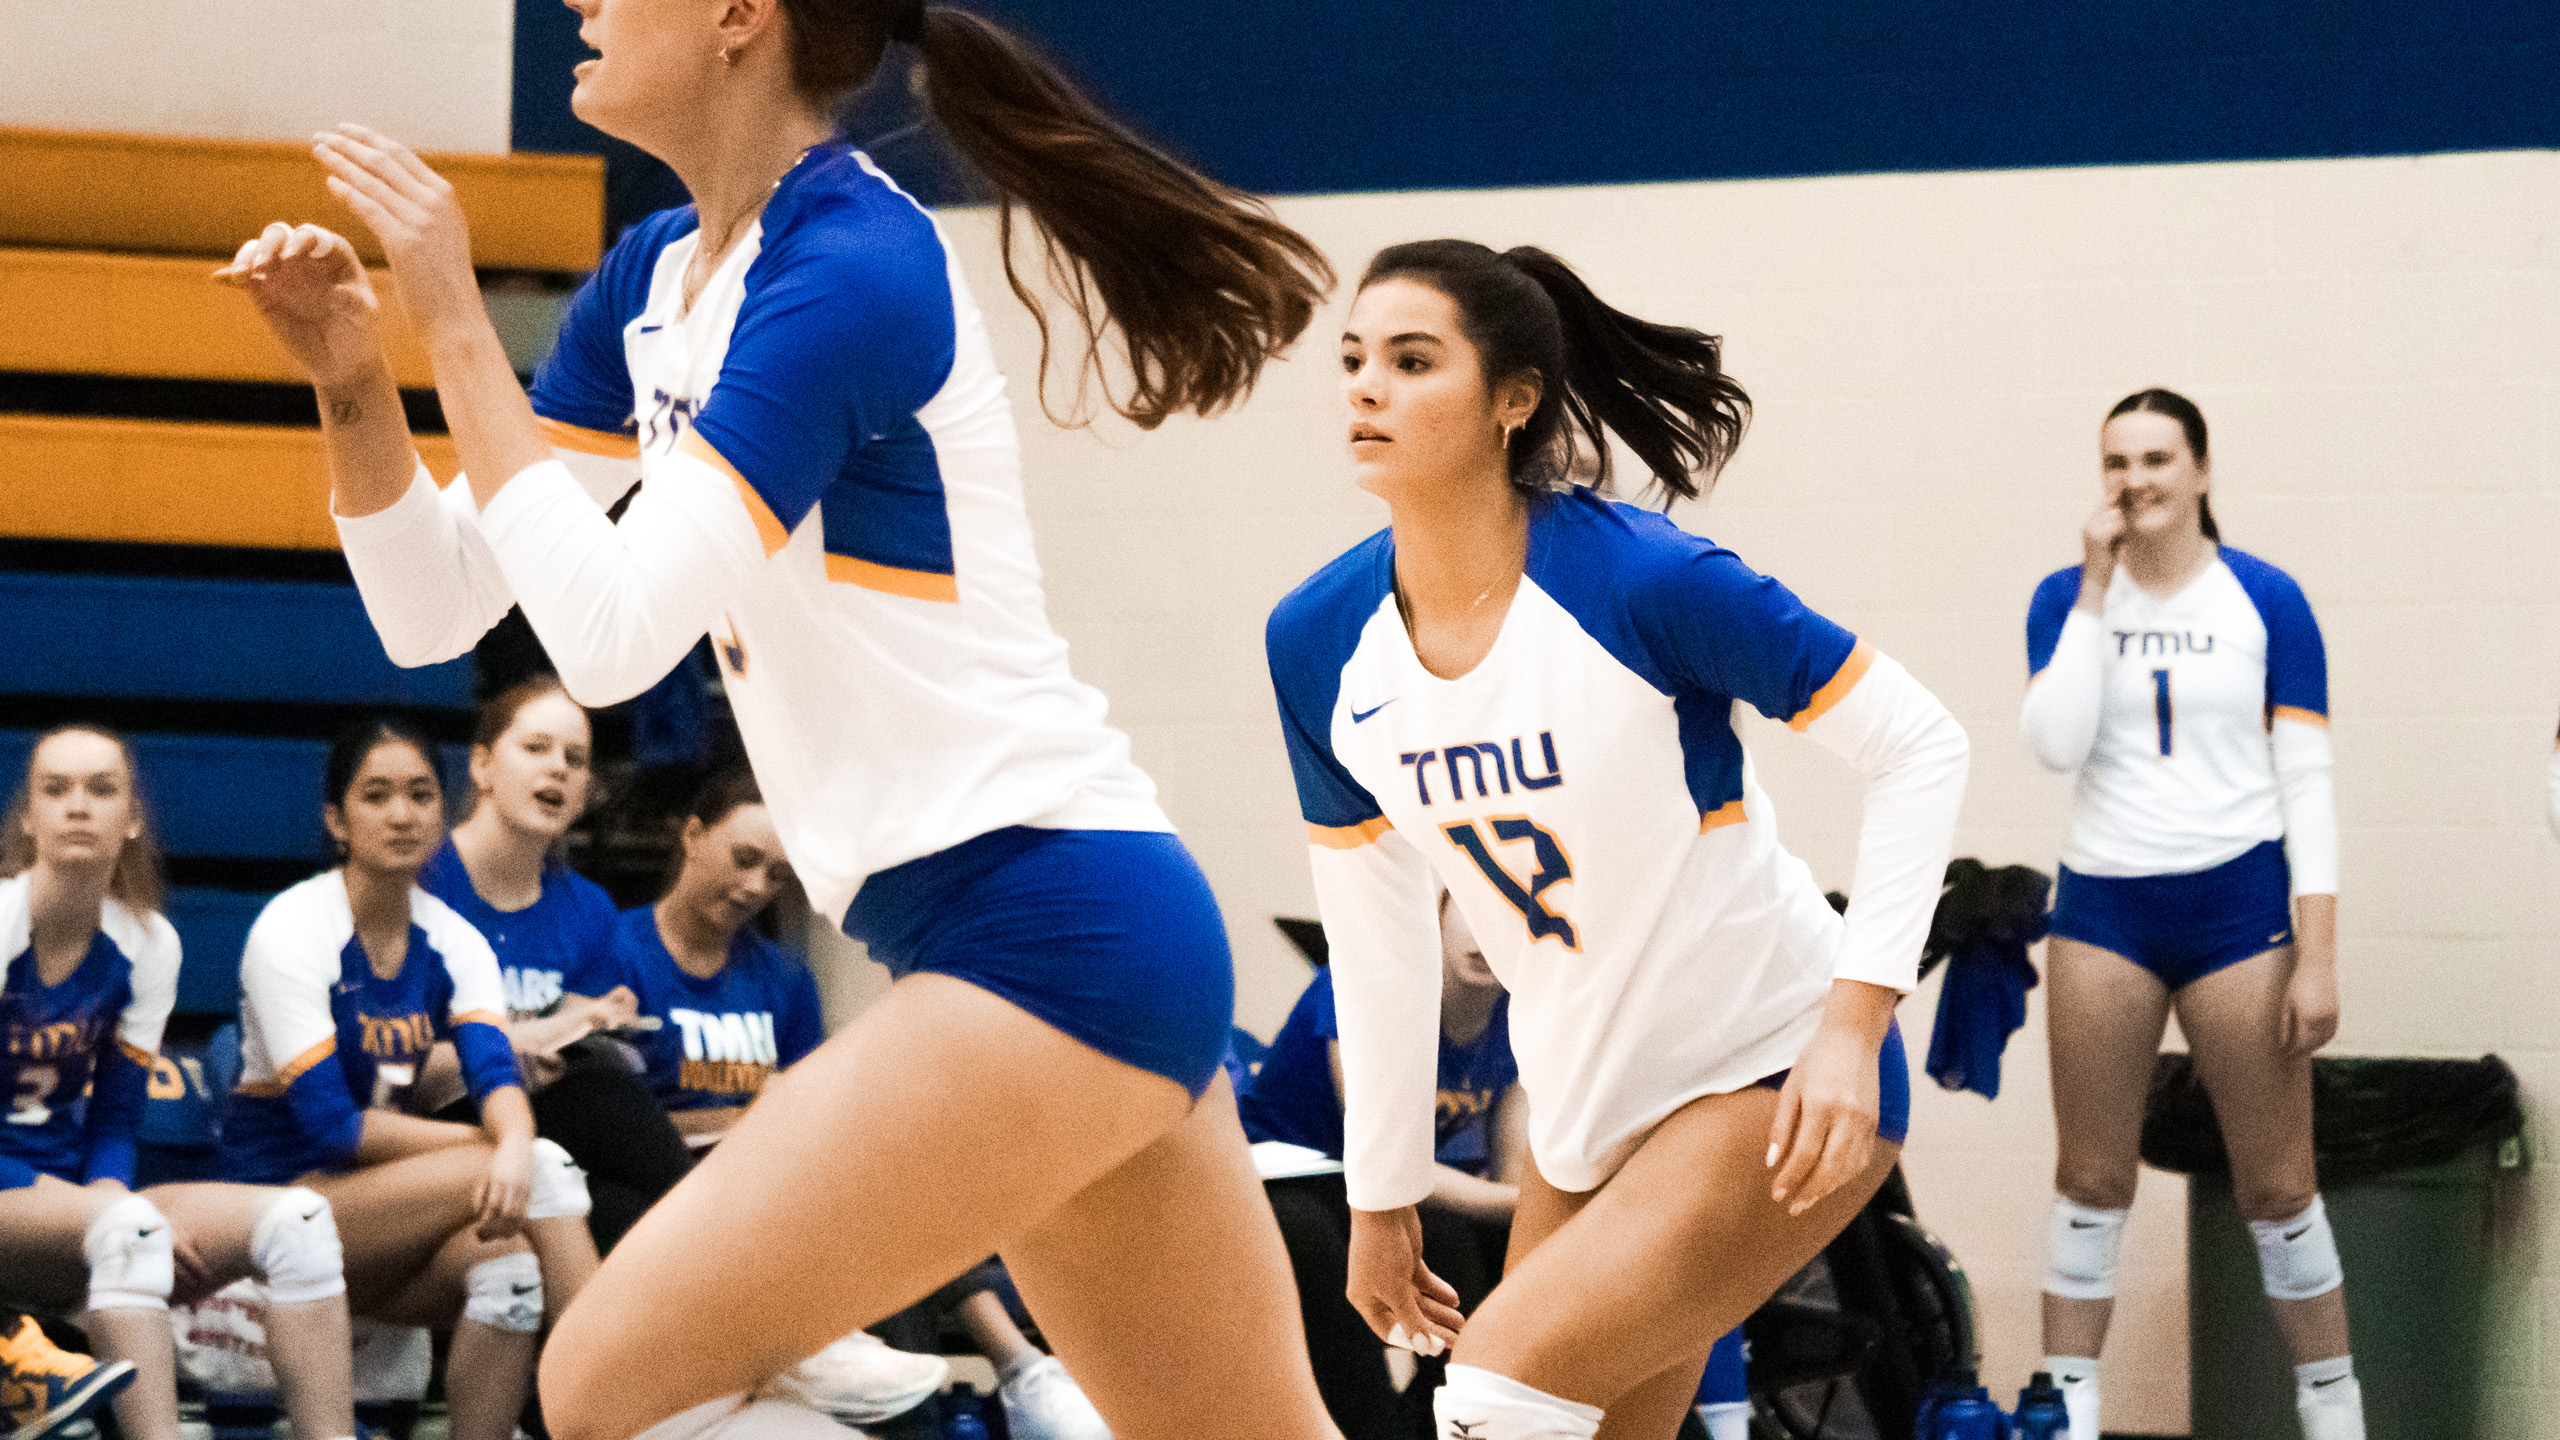 TMU women's volleyball player Scarlett Gingera prepares to jump for a ball